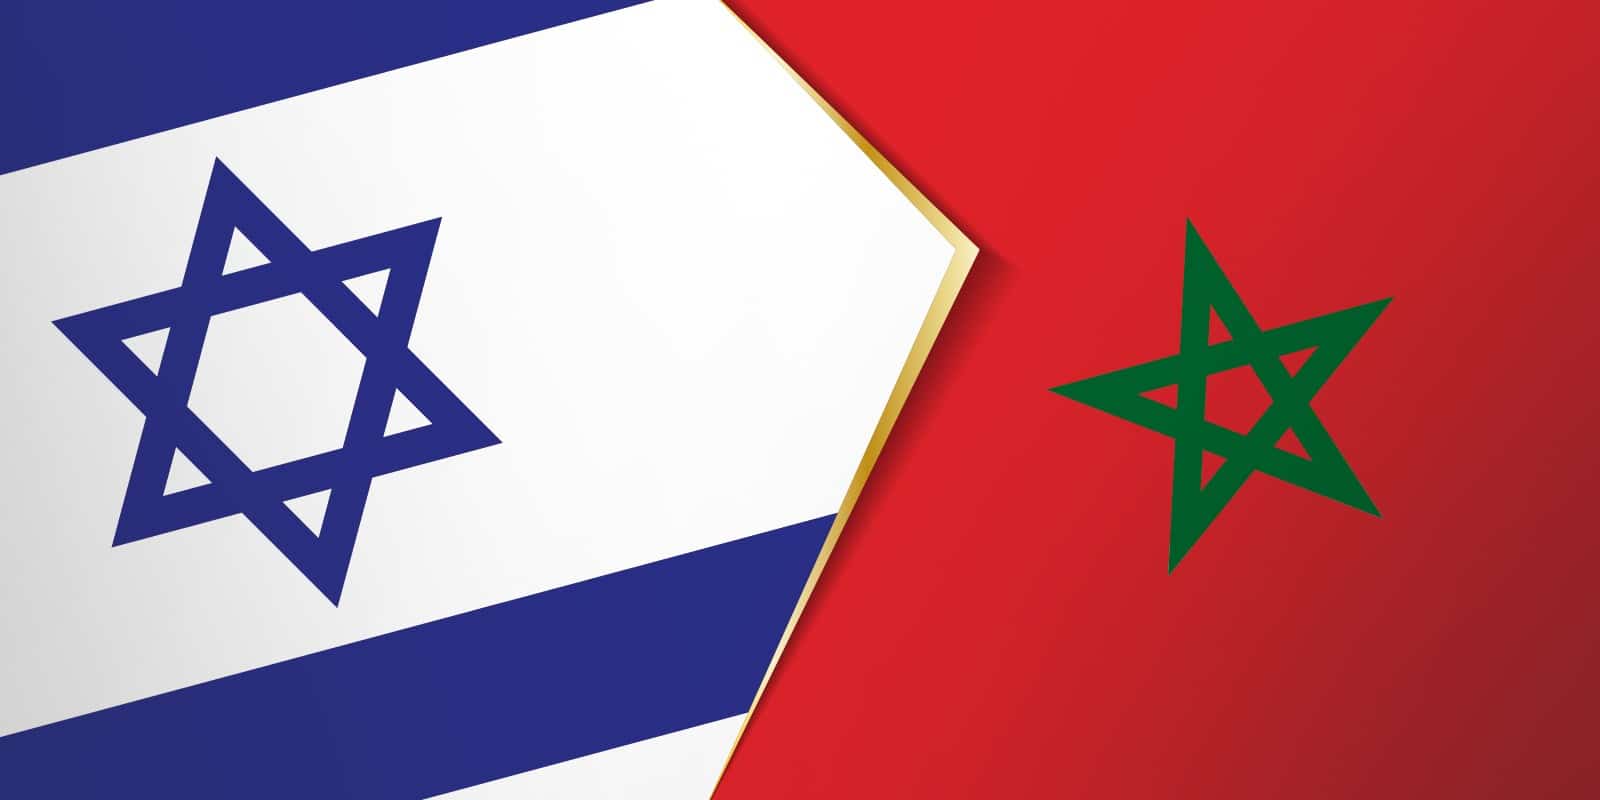 Israel and Morocco flags